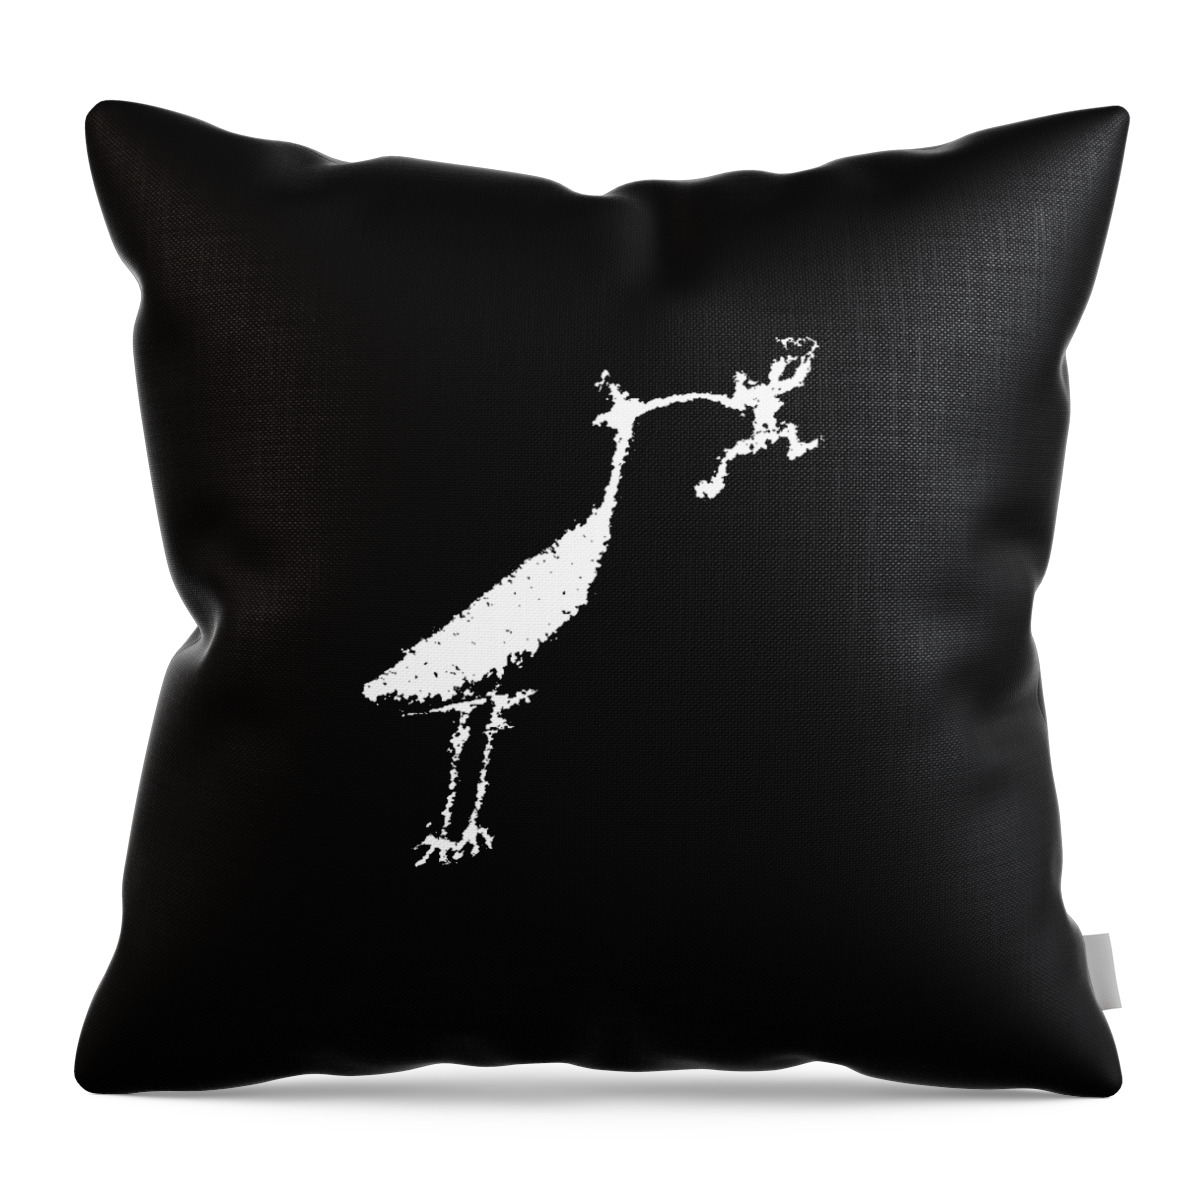 Petroglyph Throw Pillow featuring the photograph The Crane by Melany Sarafis